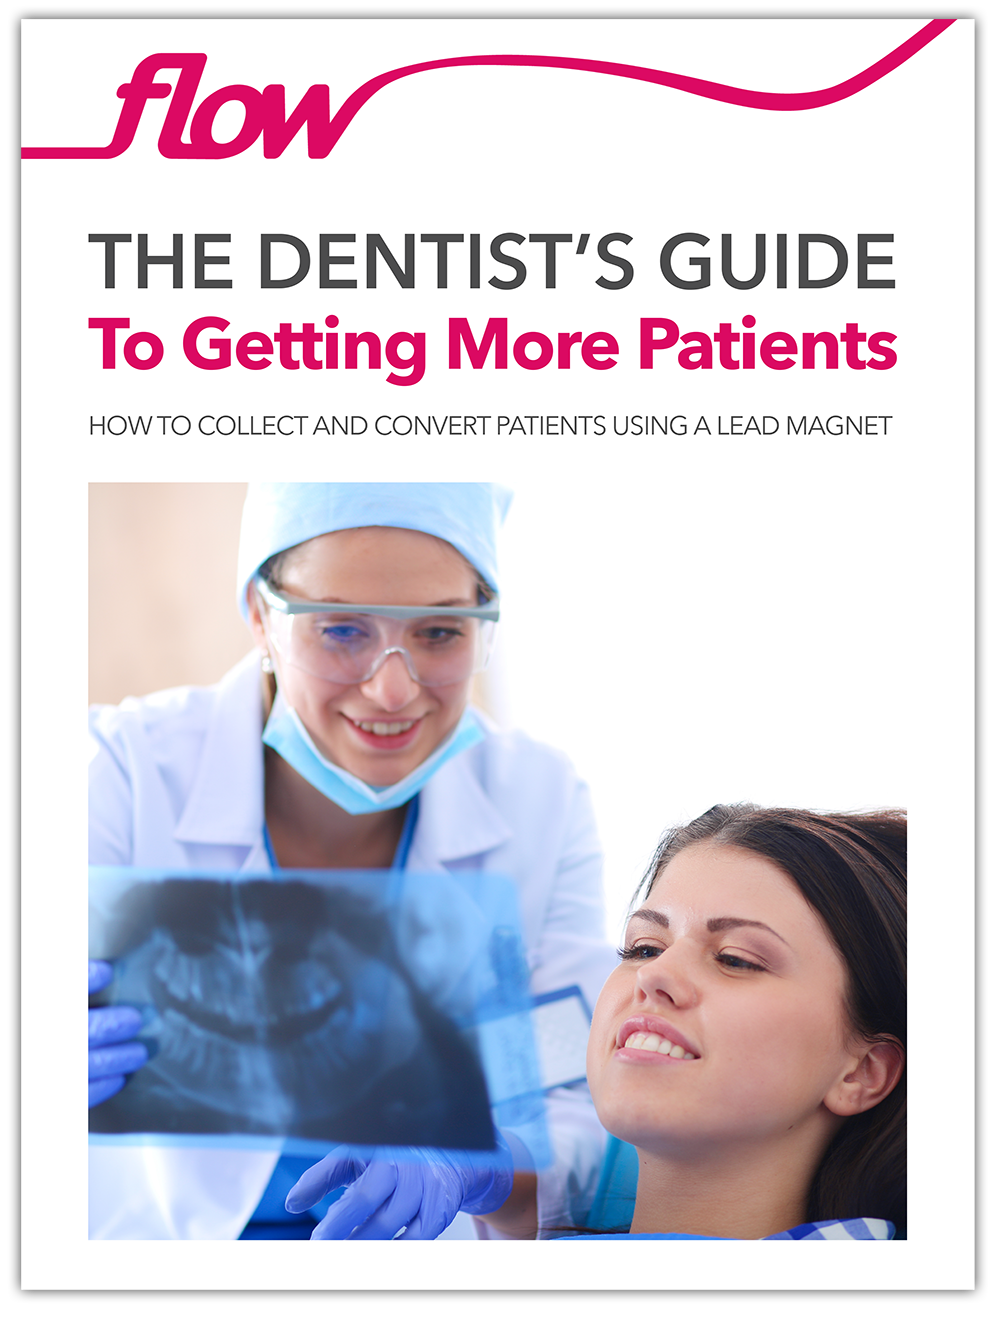 The Dentist's Guide to Getting More Leads